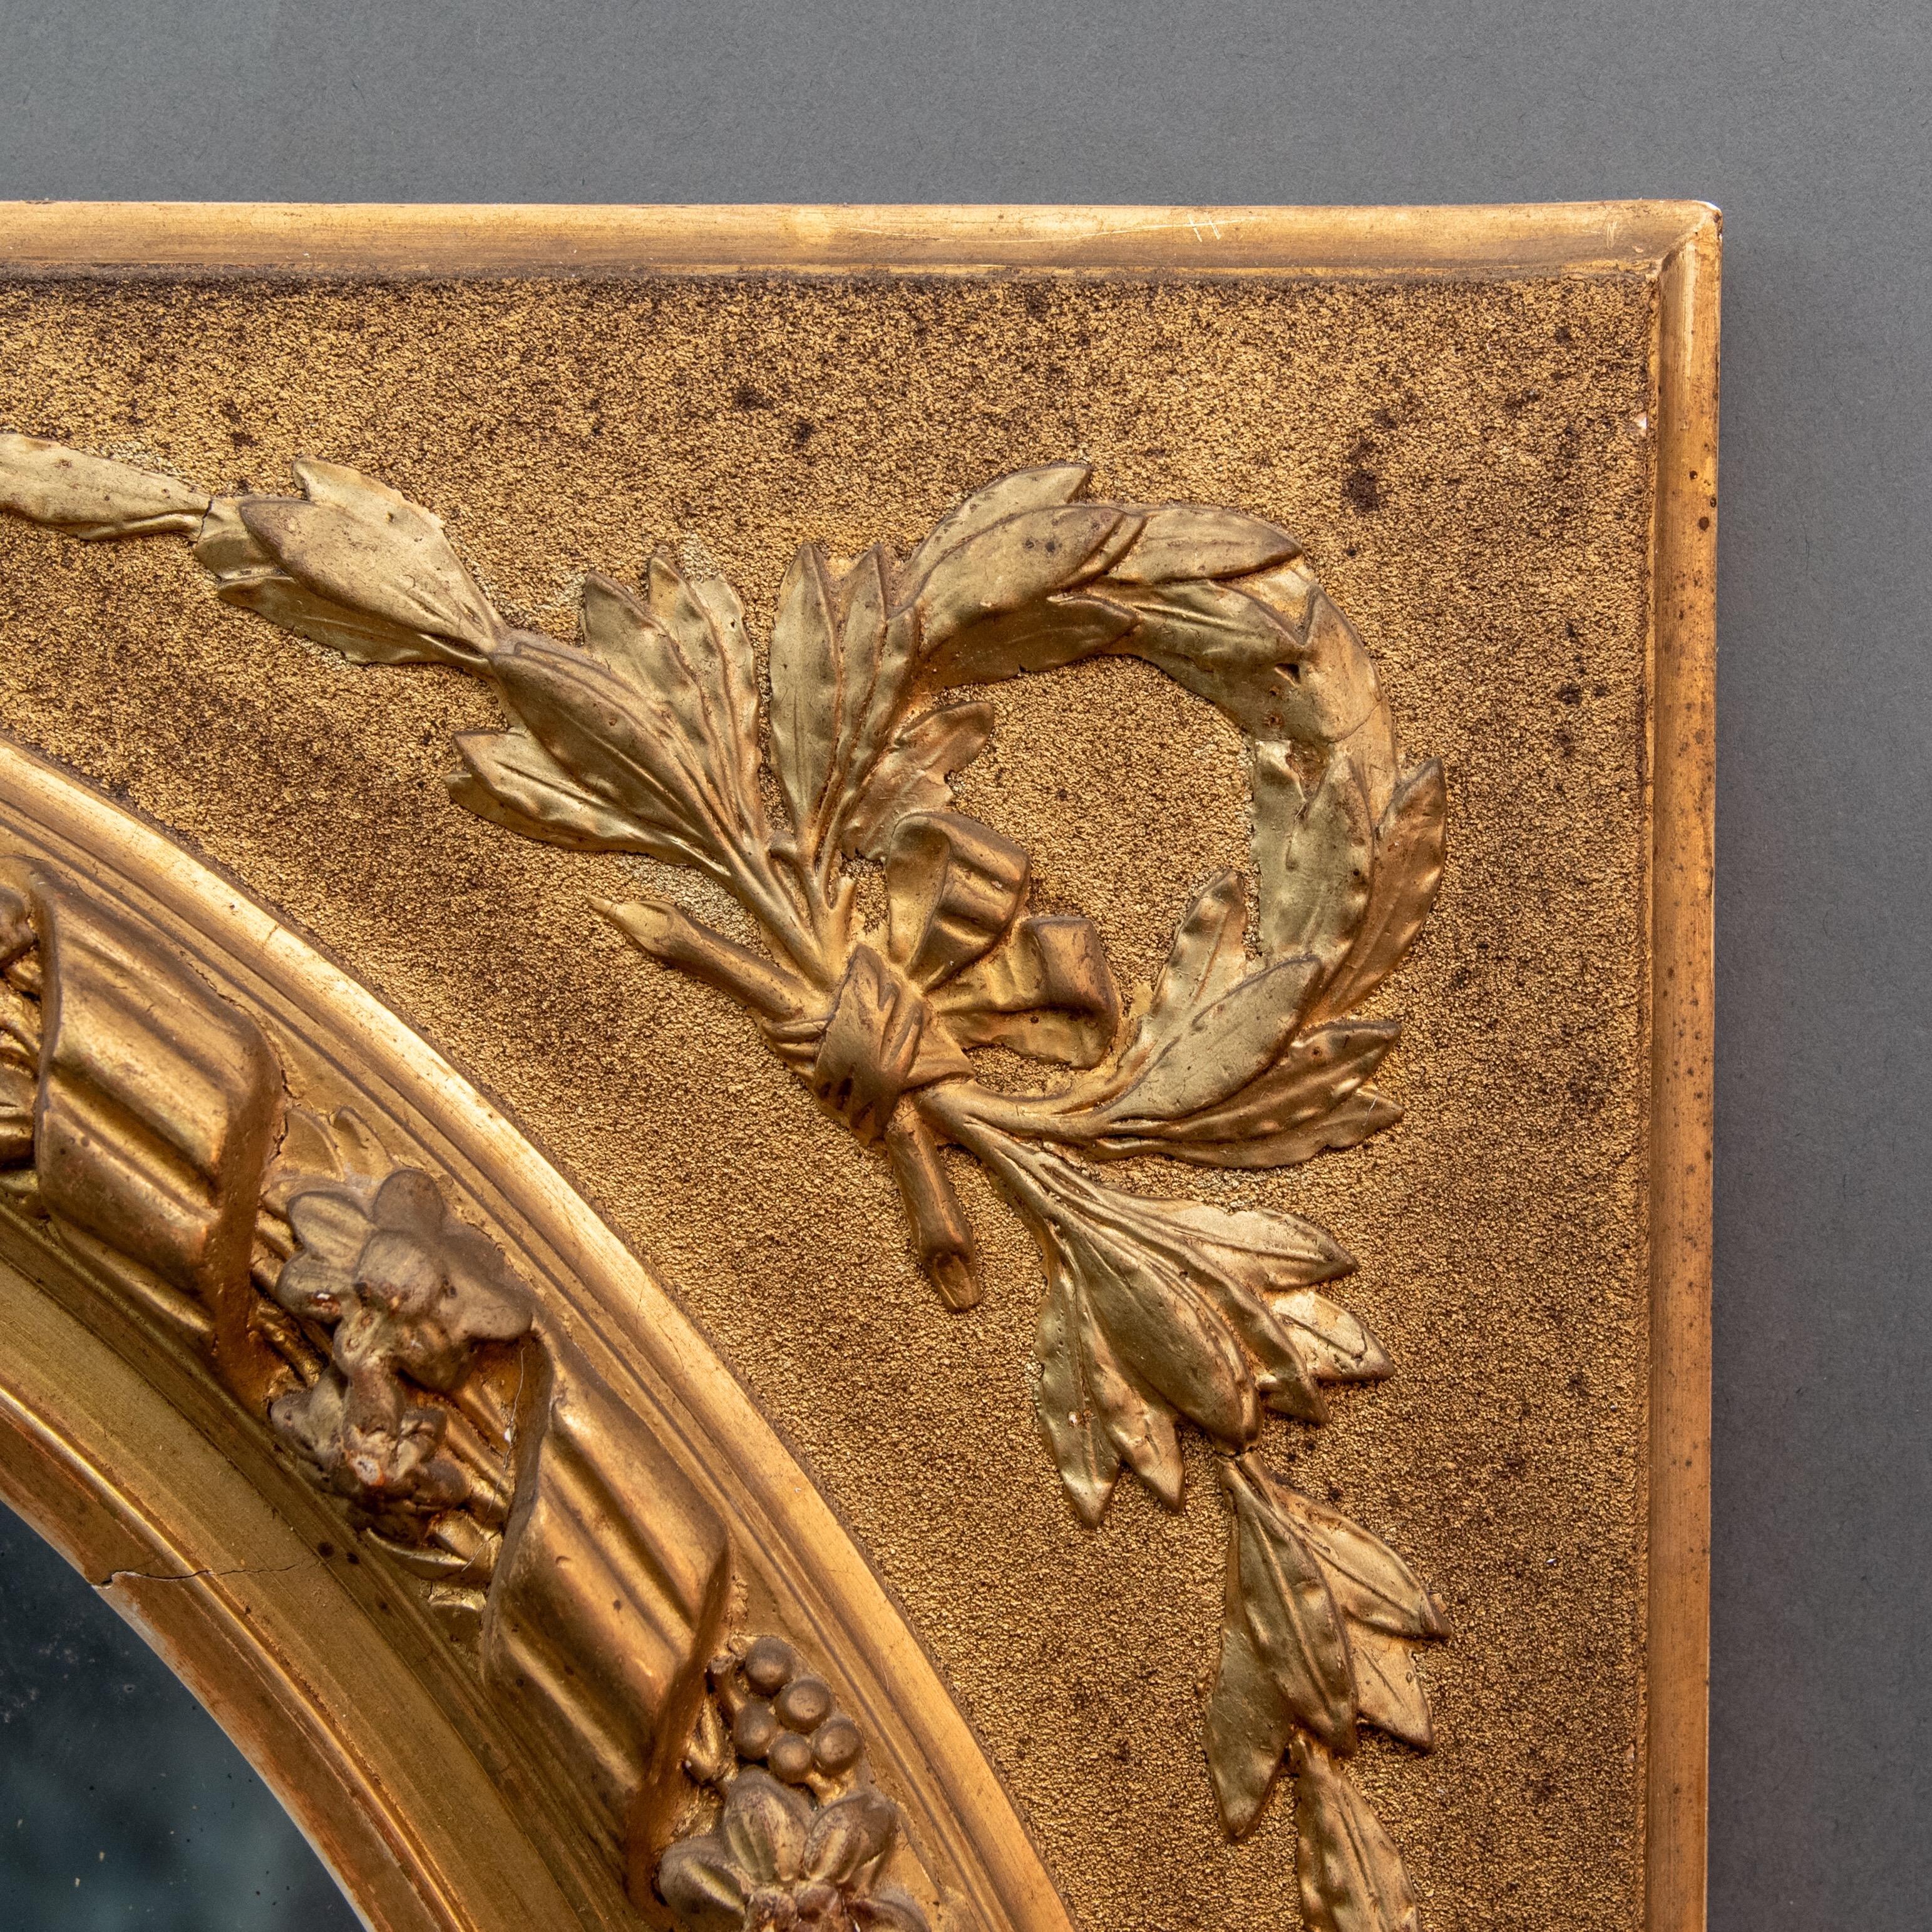 French rectangular mirror in gilded wood with gold leaf, featuring carvings, stucco, and sandblasted and golden pad decorations.








This artwork is shipped from Rome. Under existing legislation, any artwork in Italy created over 70 years ago by